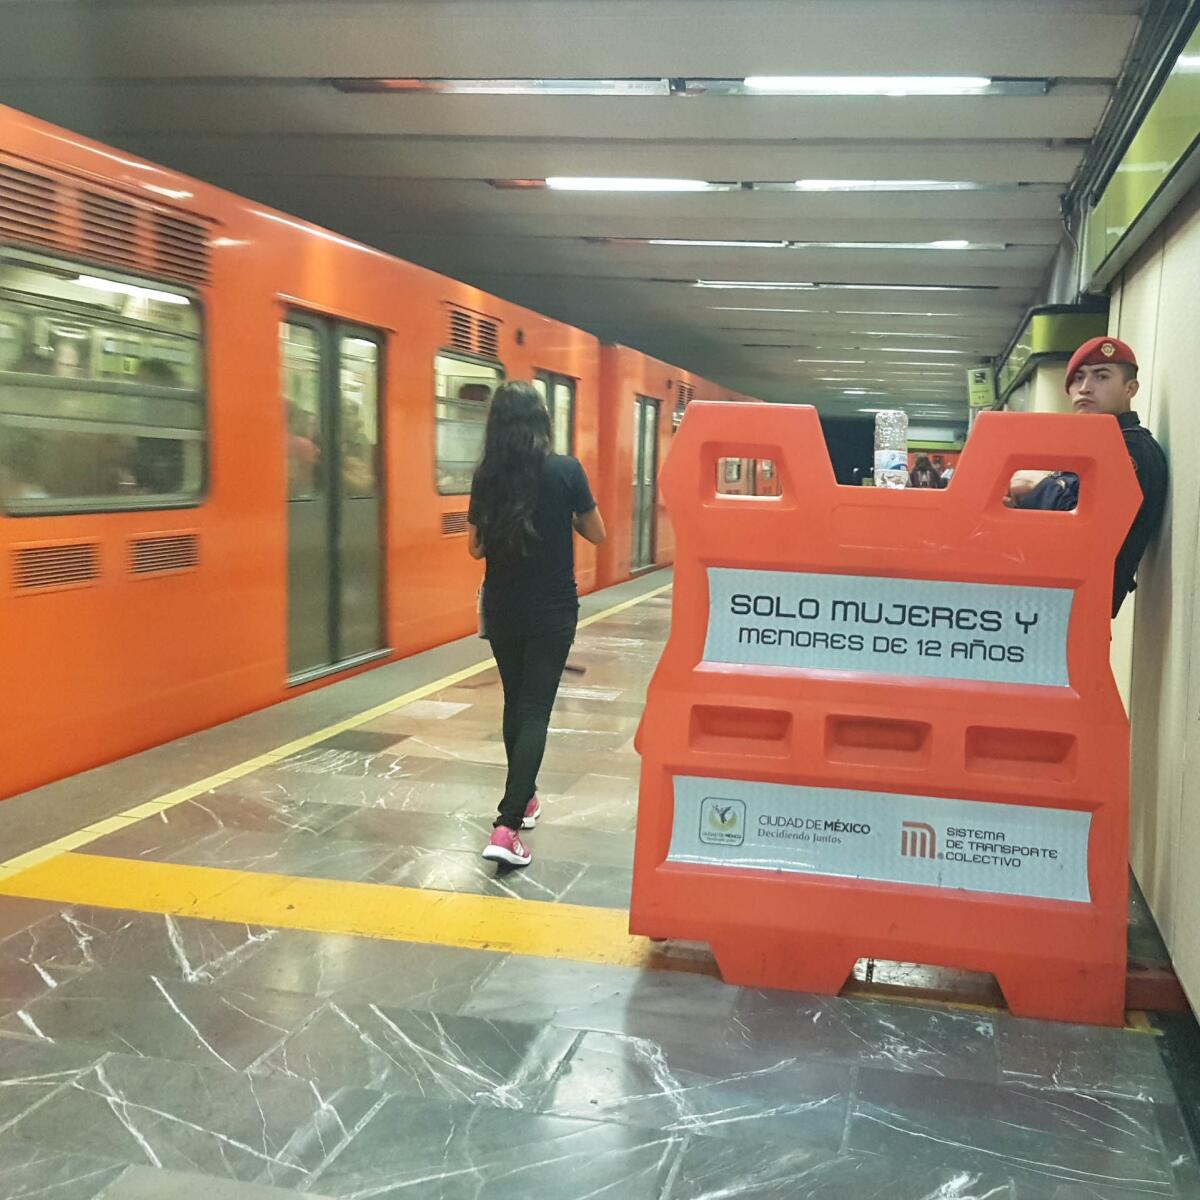 A woman walks toward the area designated for women and children only in a Mexico City subway station.